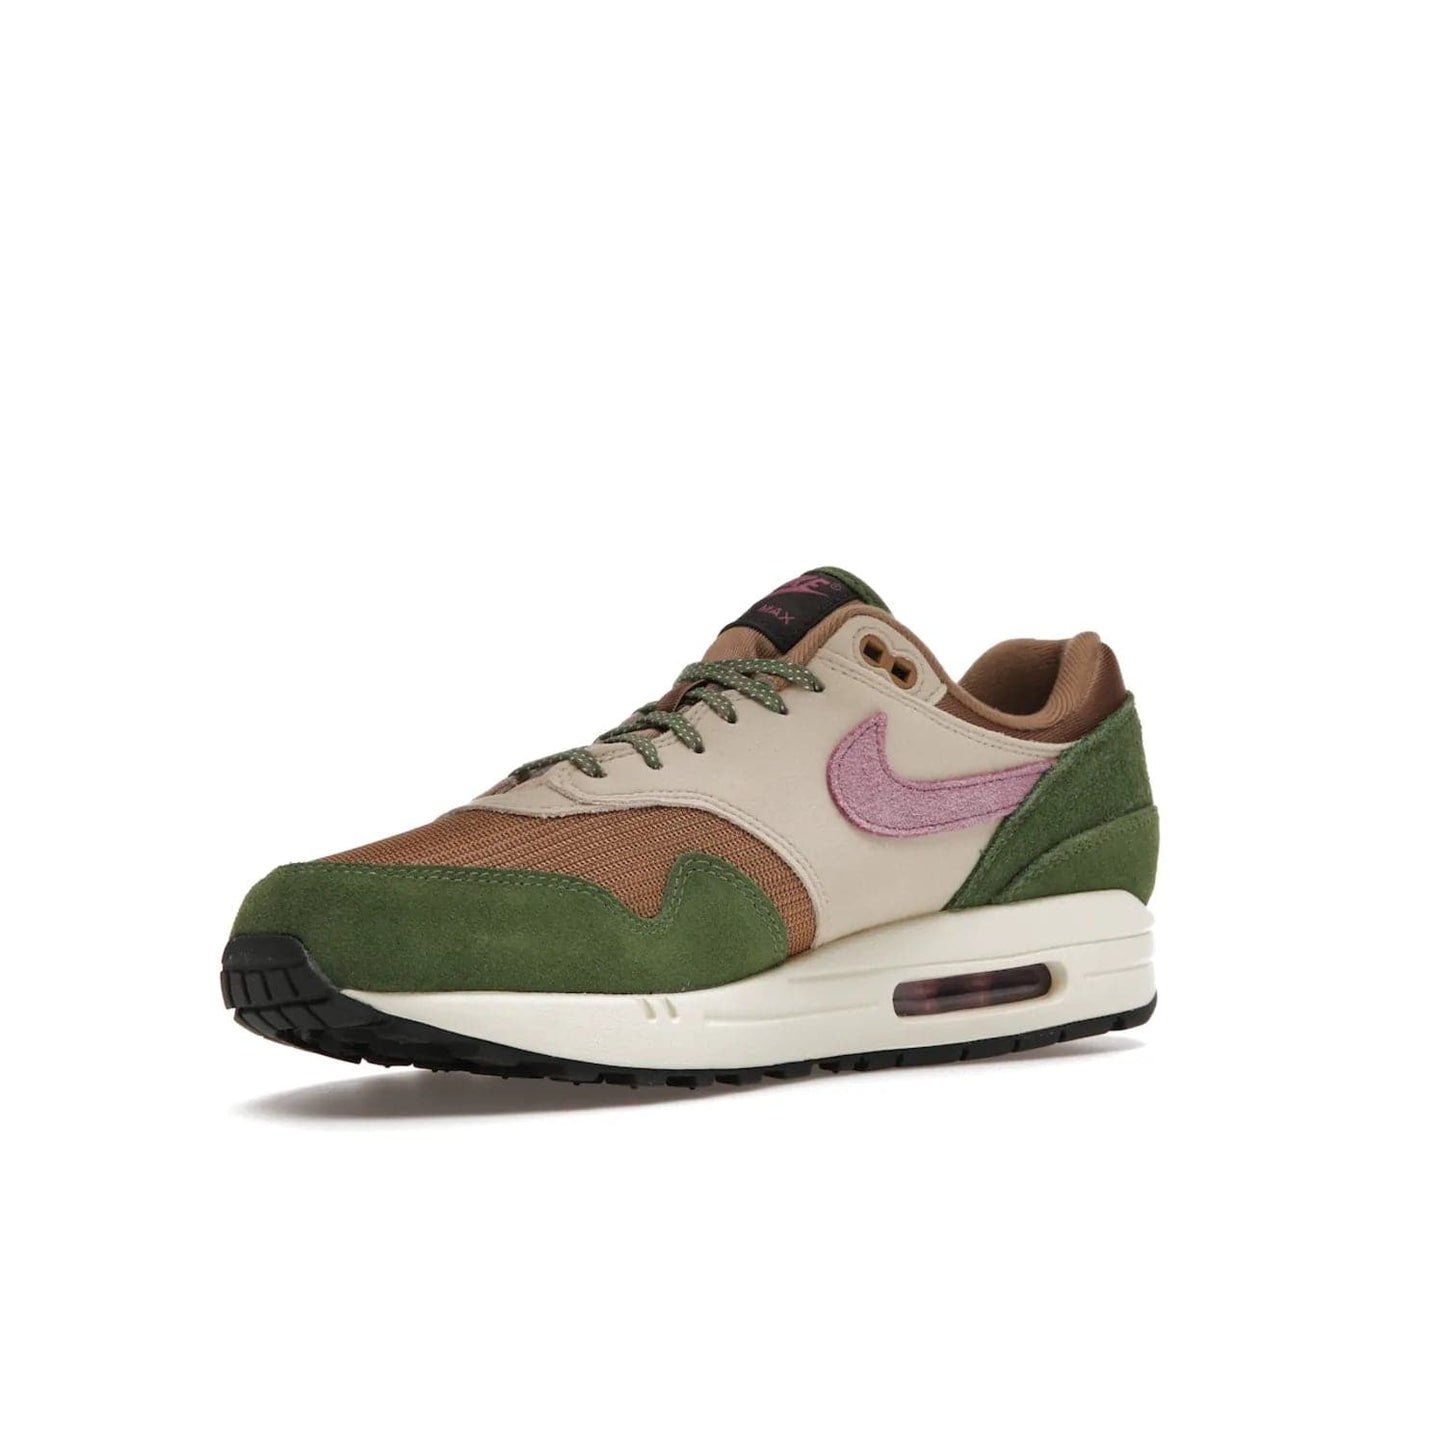 Nike Air Max 1 SH Treeline - Image 15 - Only at www.BallersClubKickz.com - A classic Nike Air Max 1 SH Treeline with a brown mesh upper, taupe Durabuck overlays, and hairy green suede details. Light Bordeaux Swoosh and woven tongue label for a pop of color. Released in May 2022. Perfect for any outfit and sure to impress.